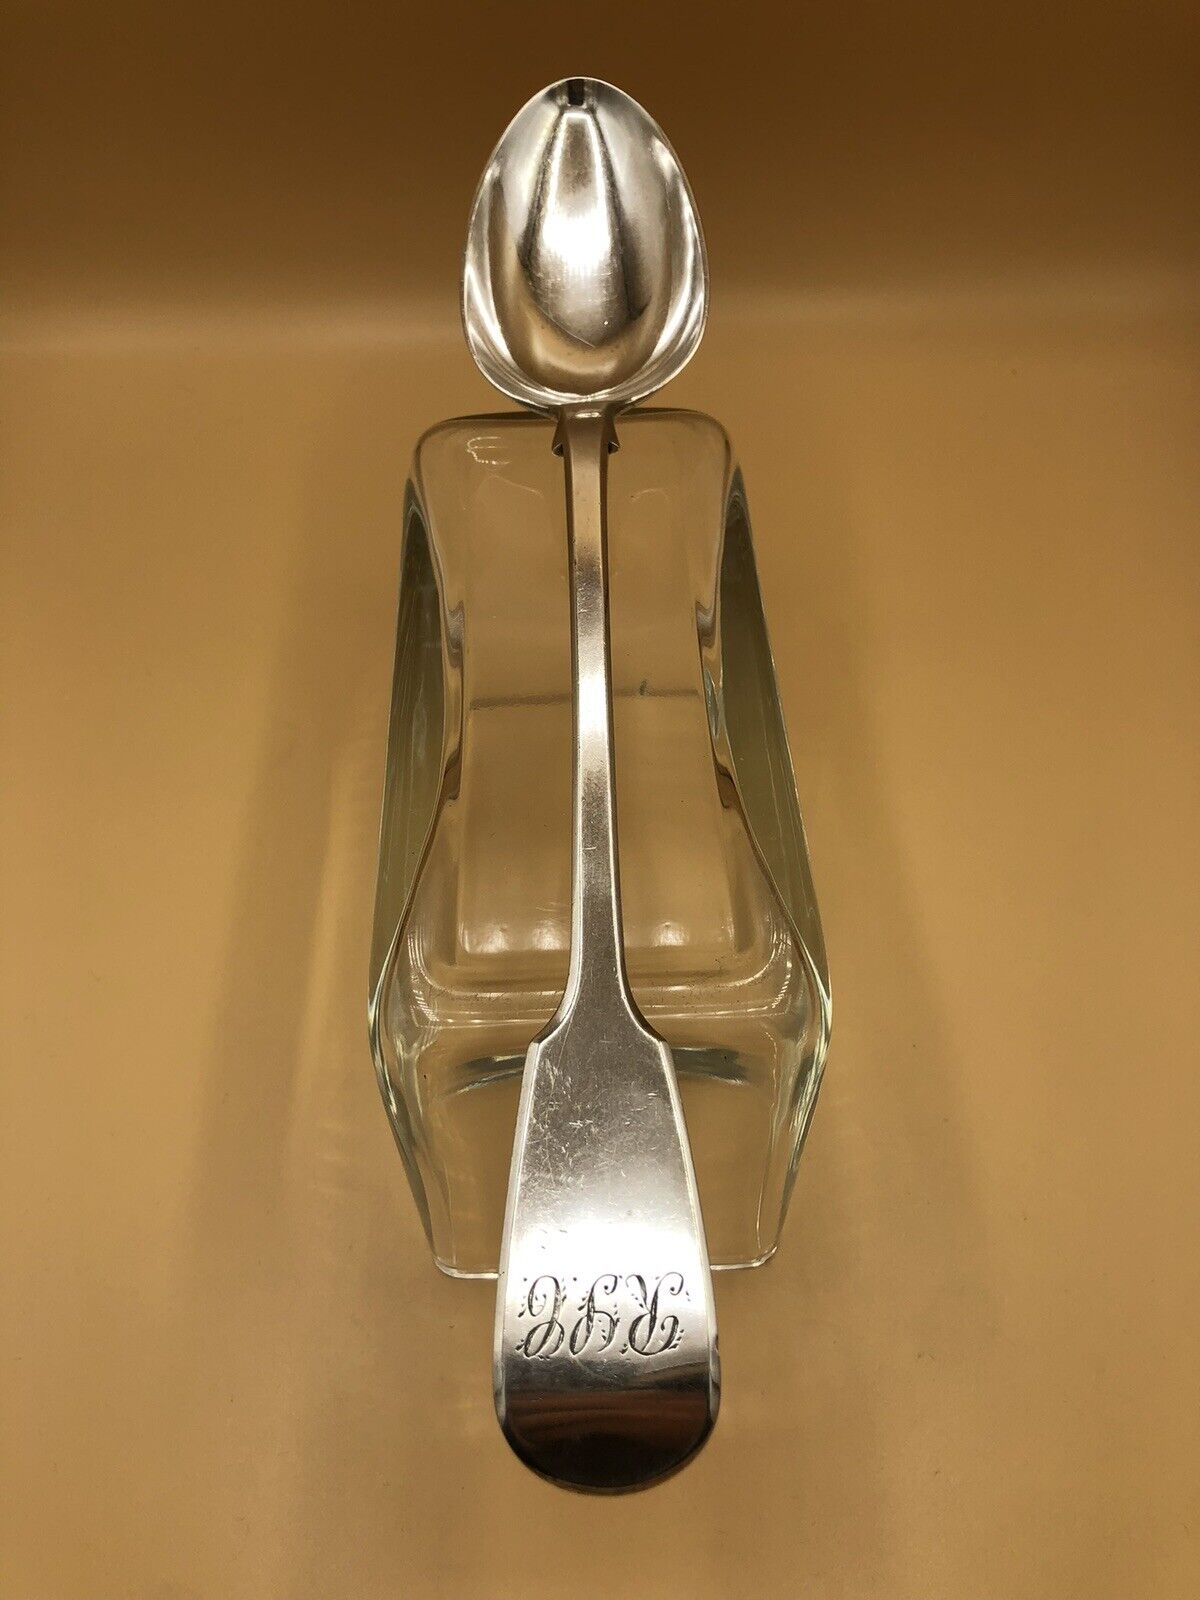 VERY GOOD SOLID SILVER GEORGE IV BASTING SPOON, 1826 BY WILLIAM CHAWNER, 156.5g